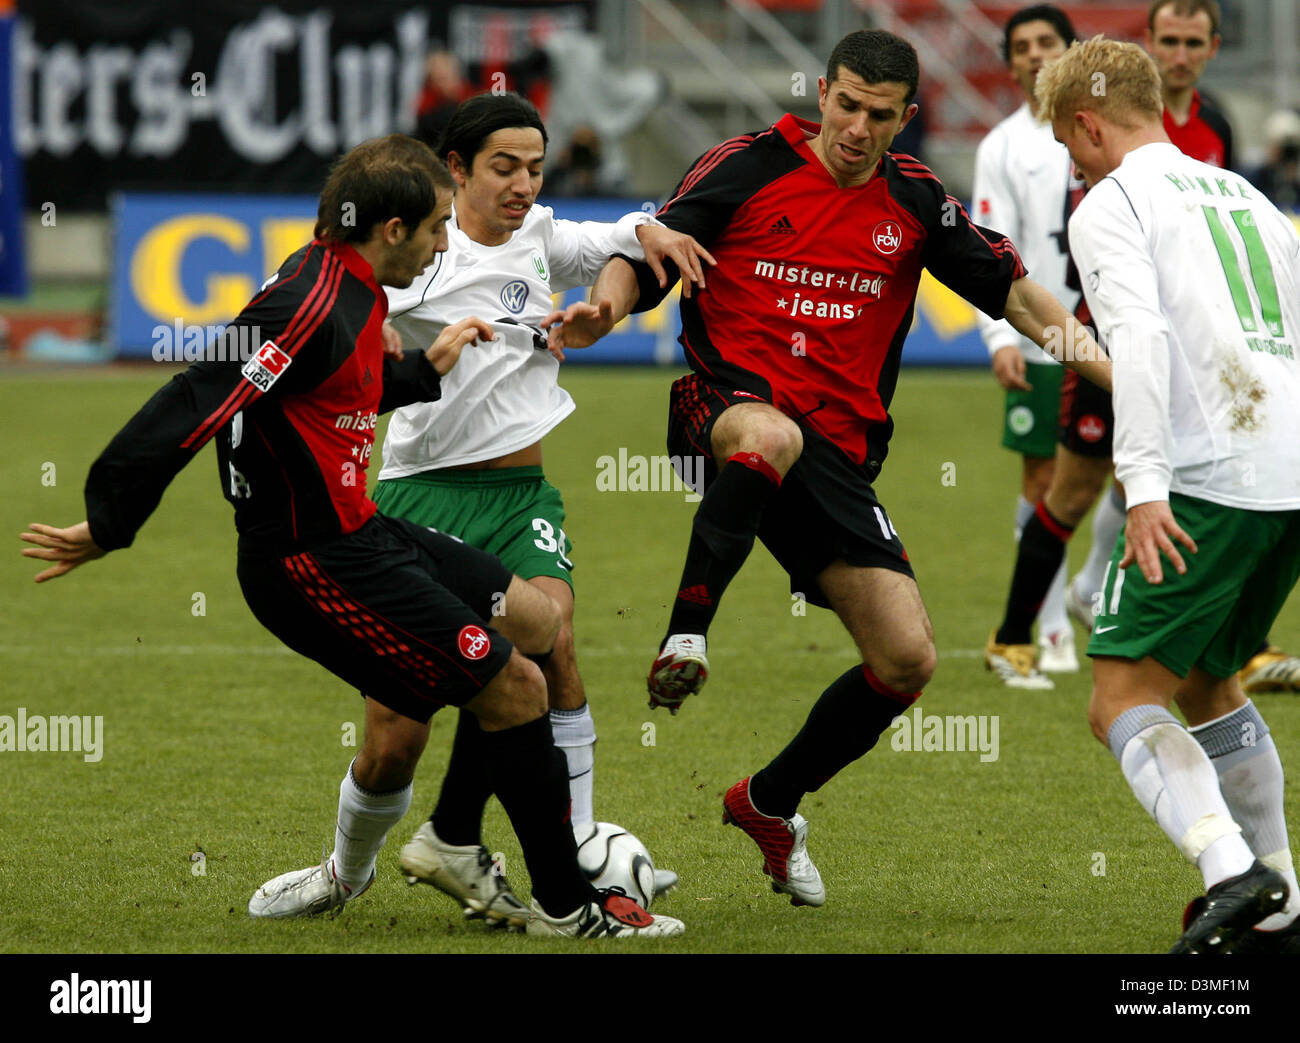 VfL Wolfsburg's Jahouar Mnari (2nd from L) and Mike Hanke (R) fight with 1.FC Nuremberg's Javier Horacio Pinola (L) and Adel Chedli (C) fight for the ball during the Bundesliga match at the Franken stadium in Nuremberg, Germany, Saturday, 18 February 2006. Photo: Daniel Karmann Stock Photo